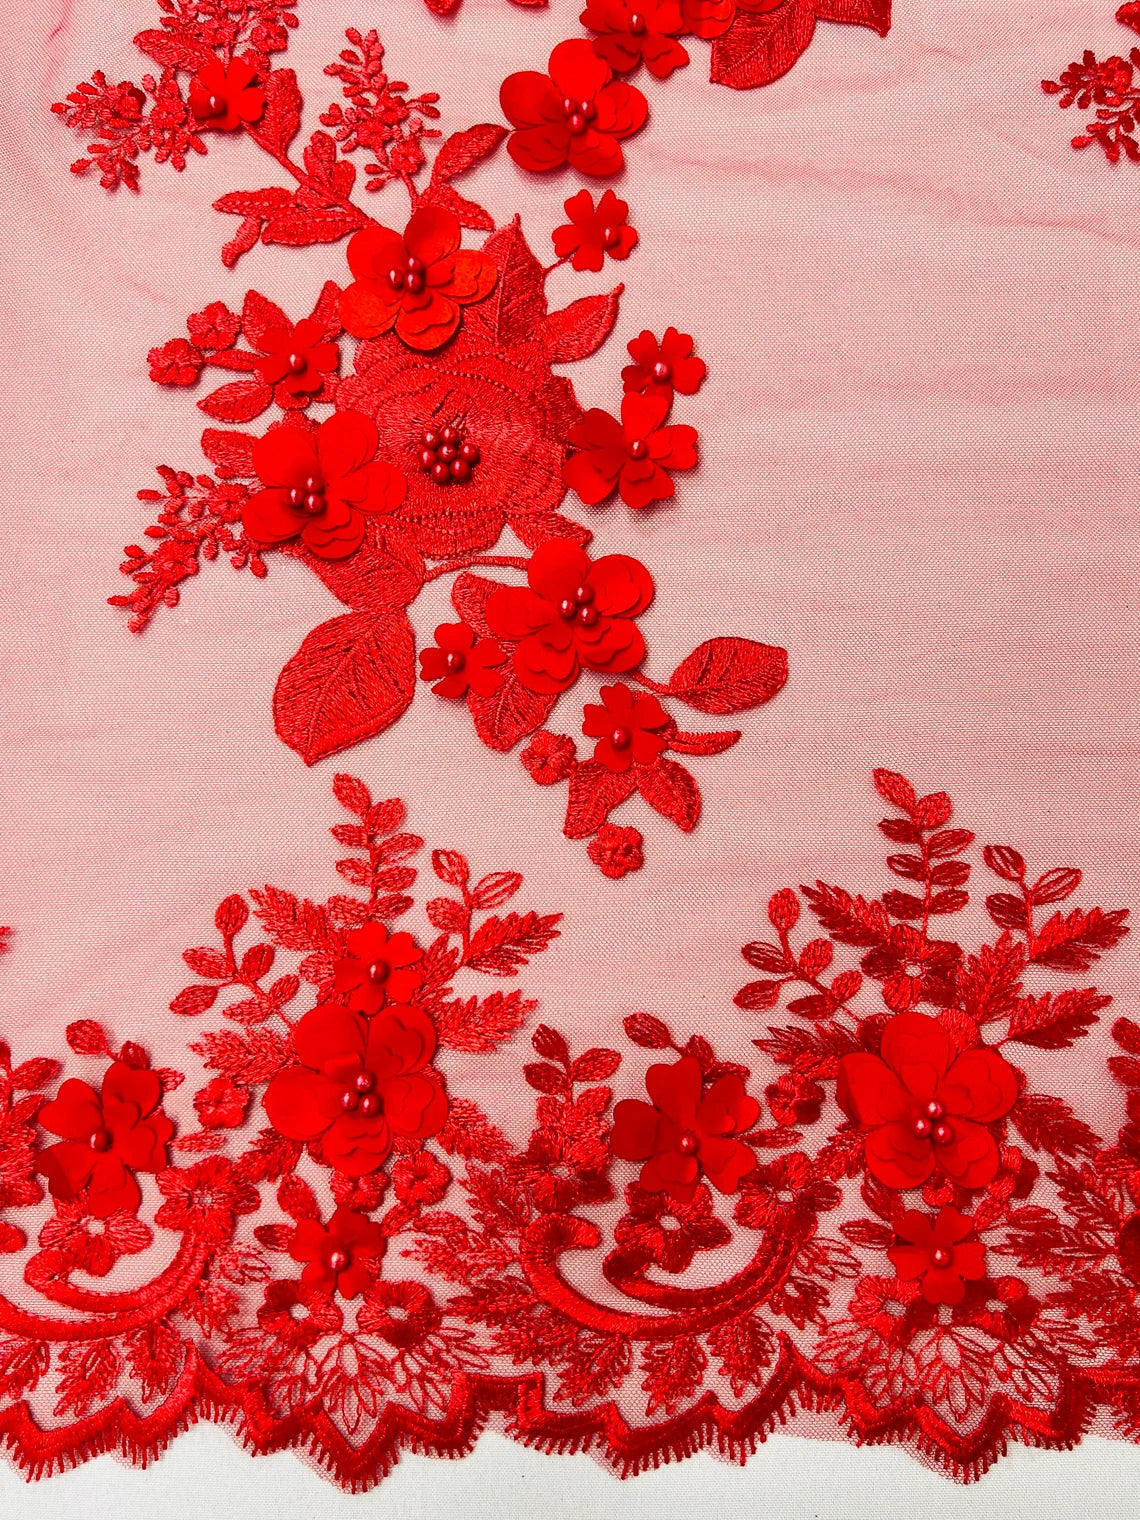 3D Flower Panels Fabric - Red - Flower Panels Bead Embroidered on Lace Fabric Sold By Yard